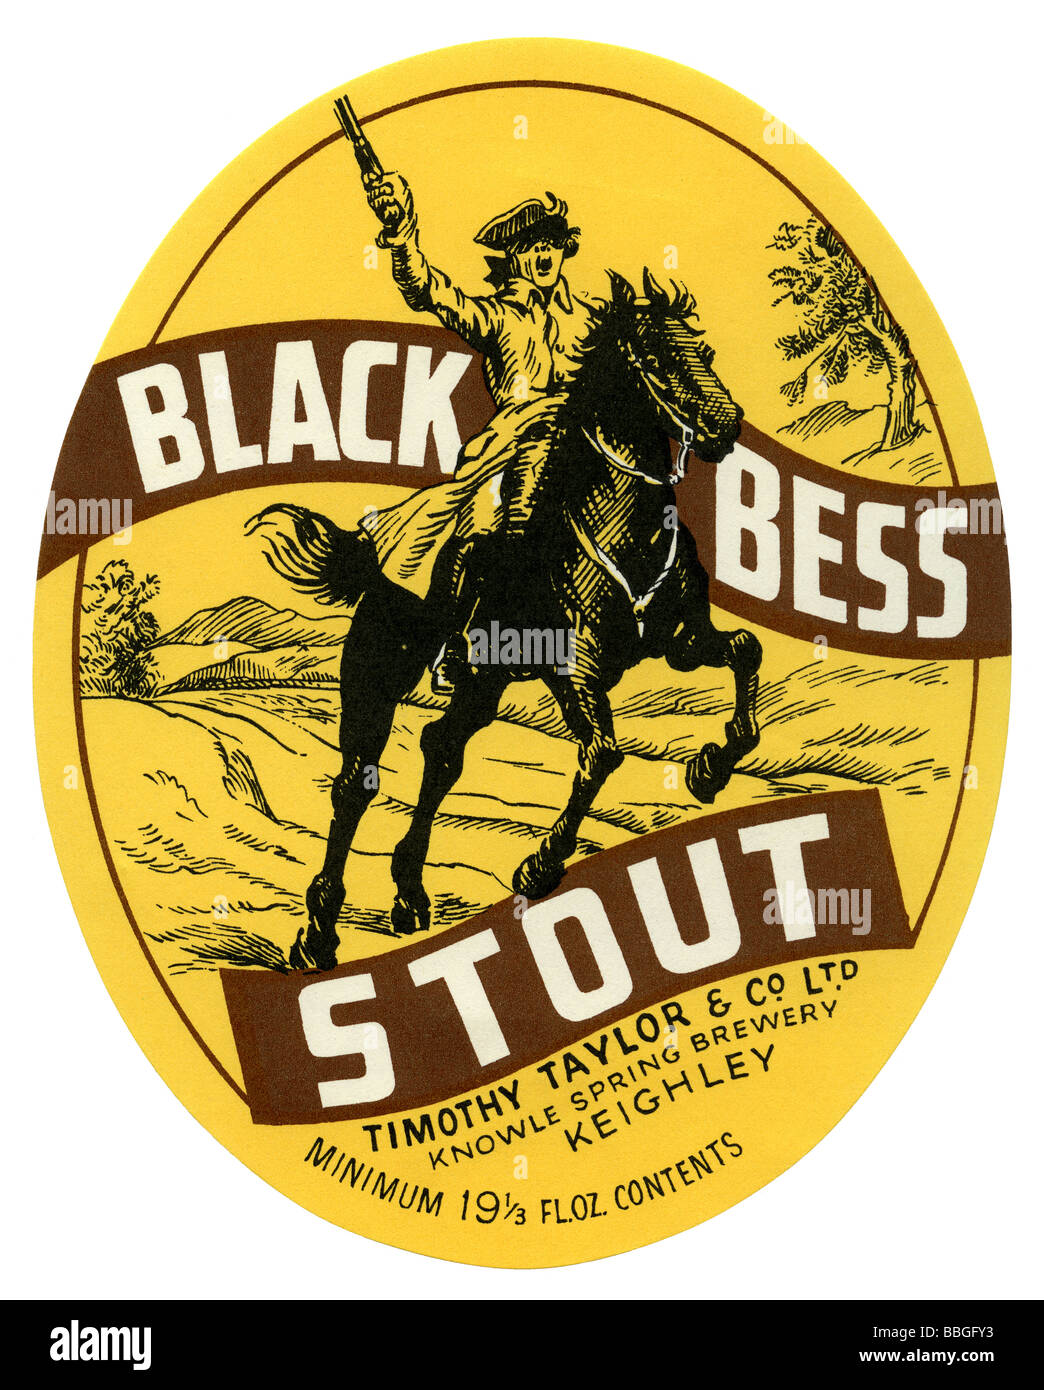 Old British beer label for Timothy Taylor's Black Bess Stout, Keighley, West Yorkshire Stock Photo